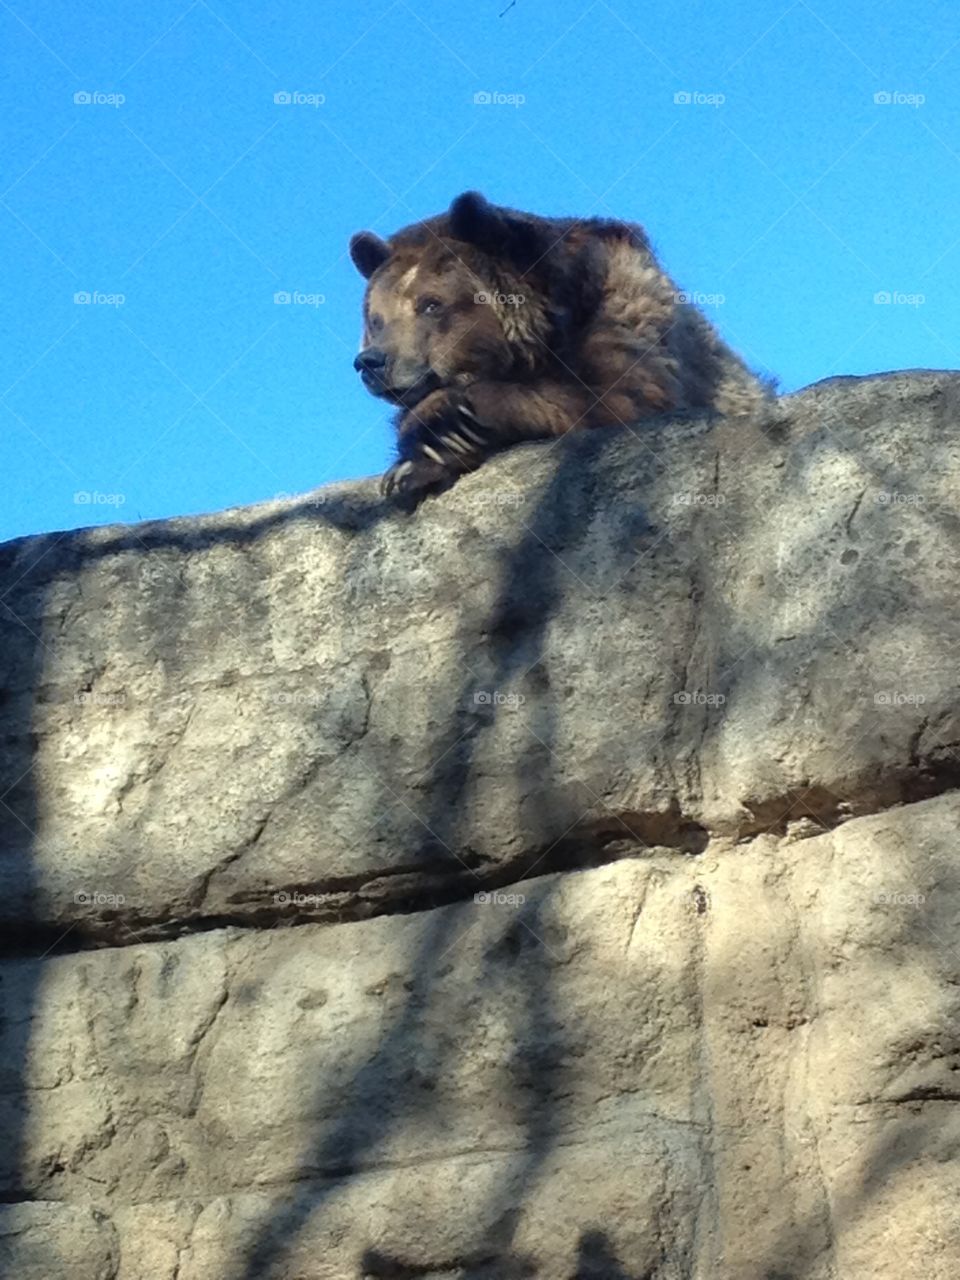 Bear peering over cliff. Bear looking out over cliff edge 